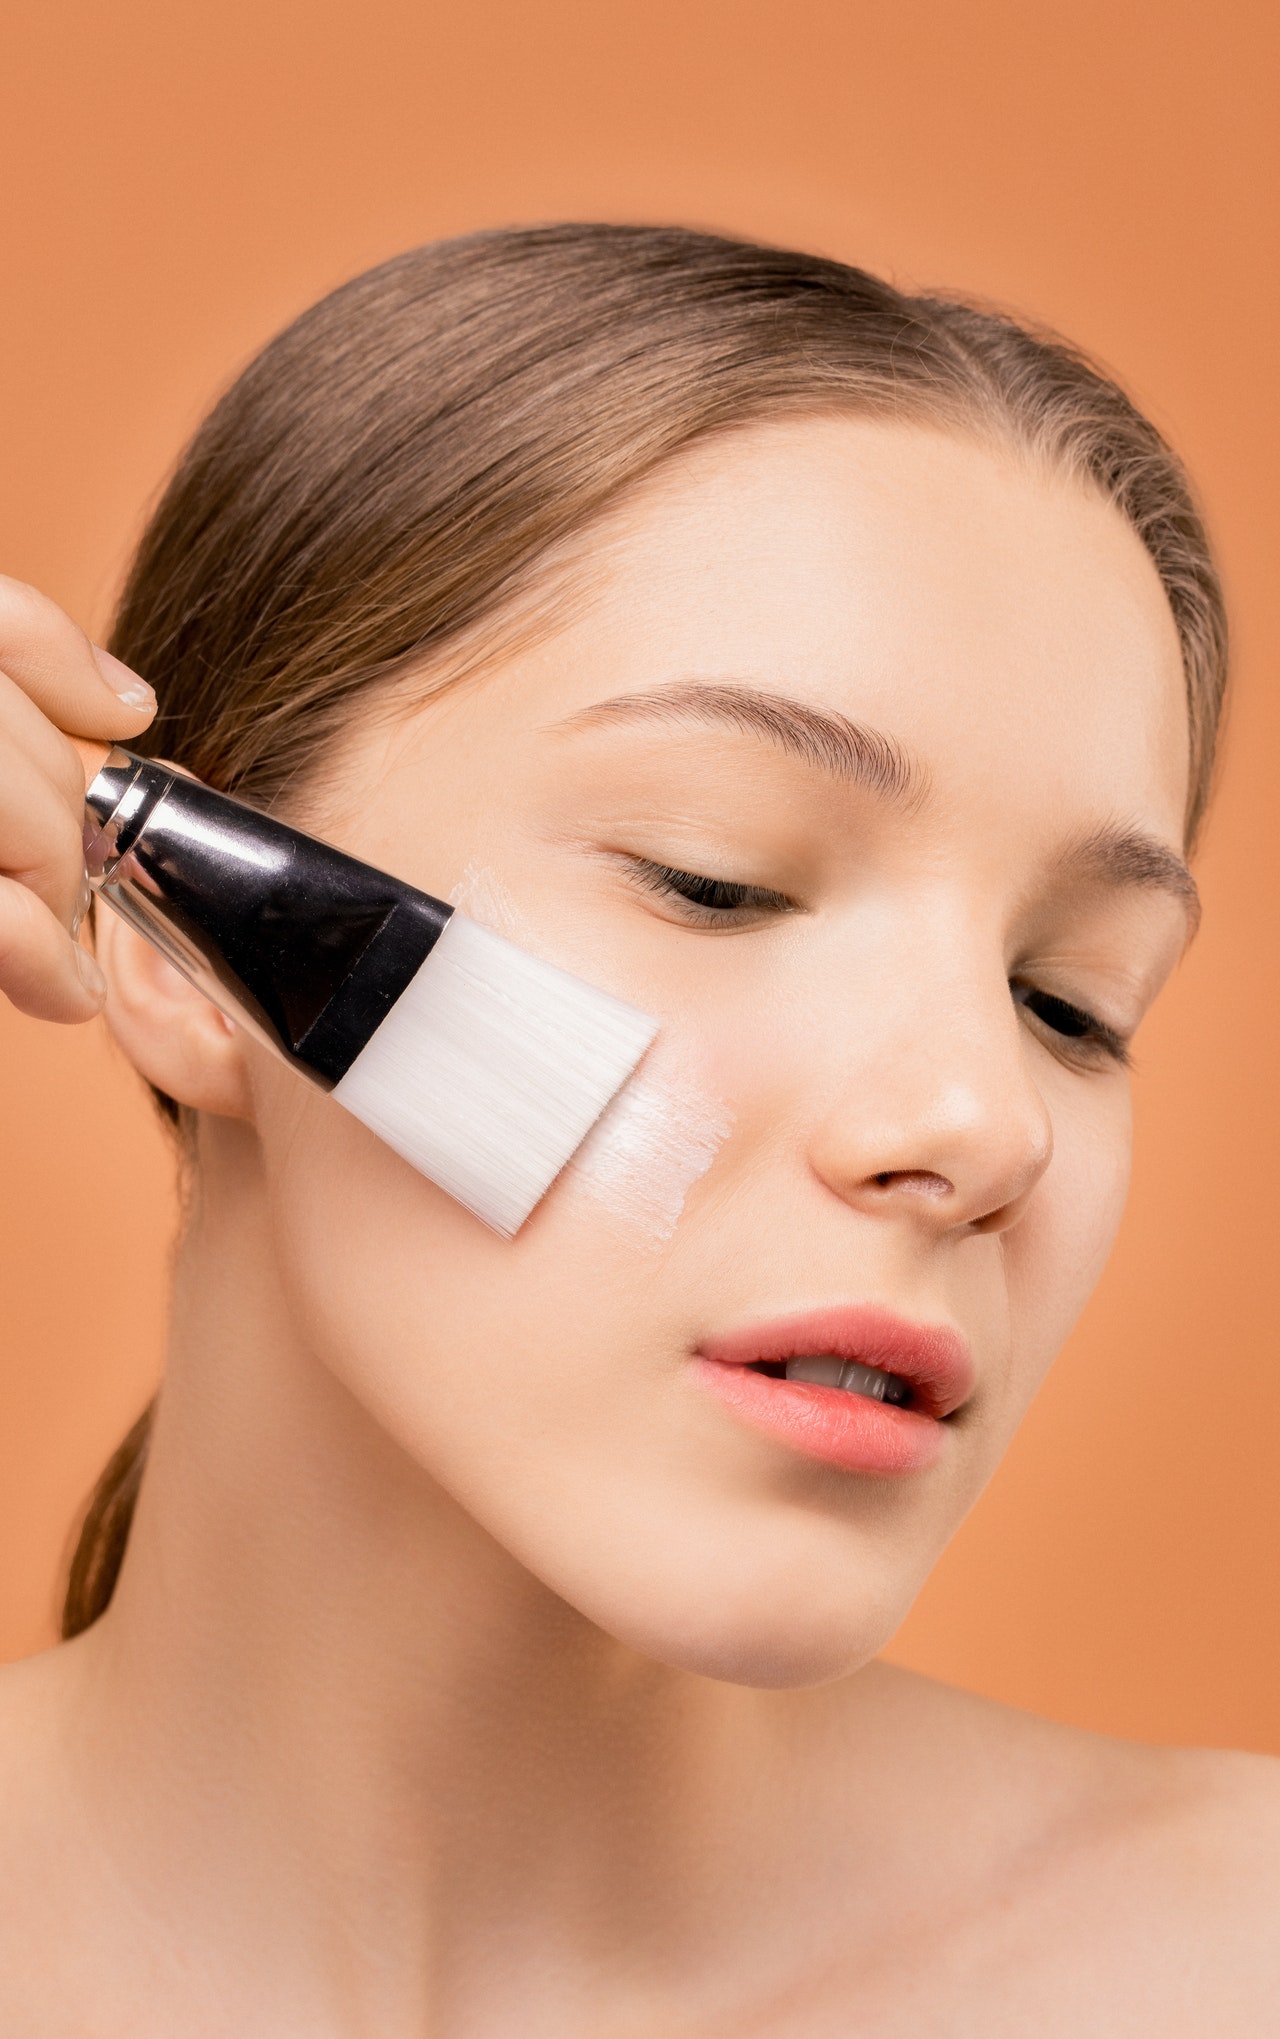 Beauty Tips: Then is how to make your skin gleam during gestation.